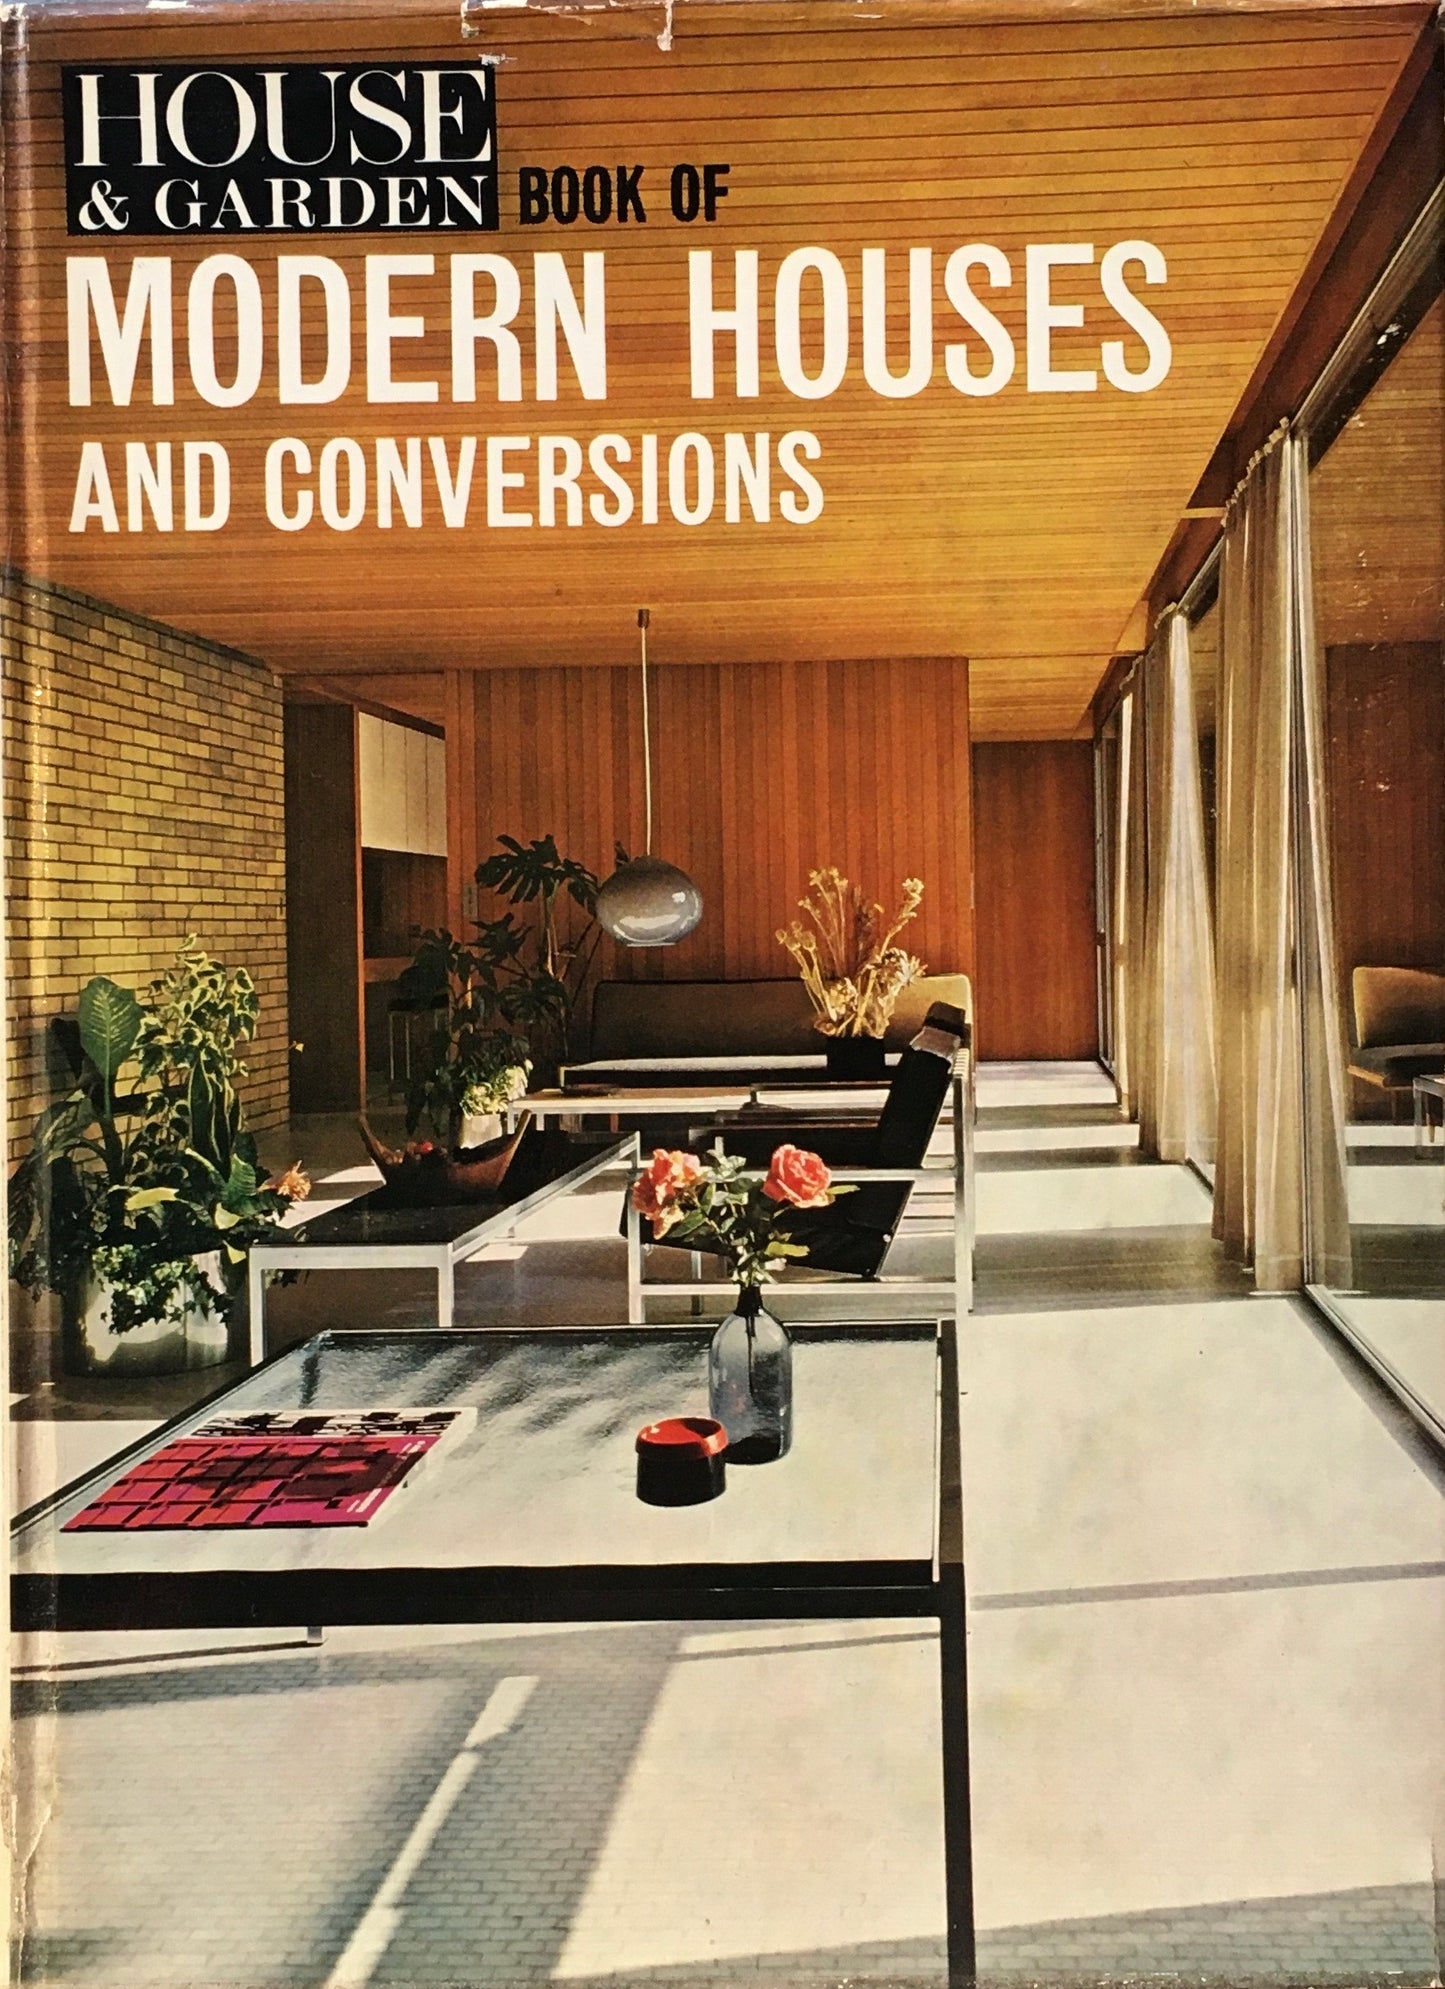 HOUSE＆GARDEN　BOOK OF MODERN HOUSES AND CONVERSIONS　Robert Harling